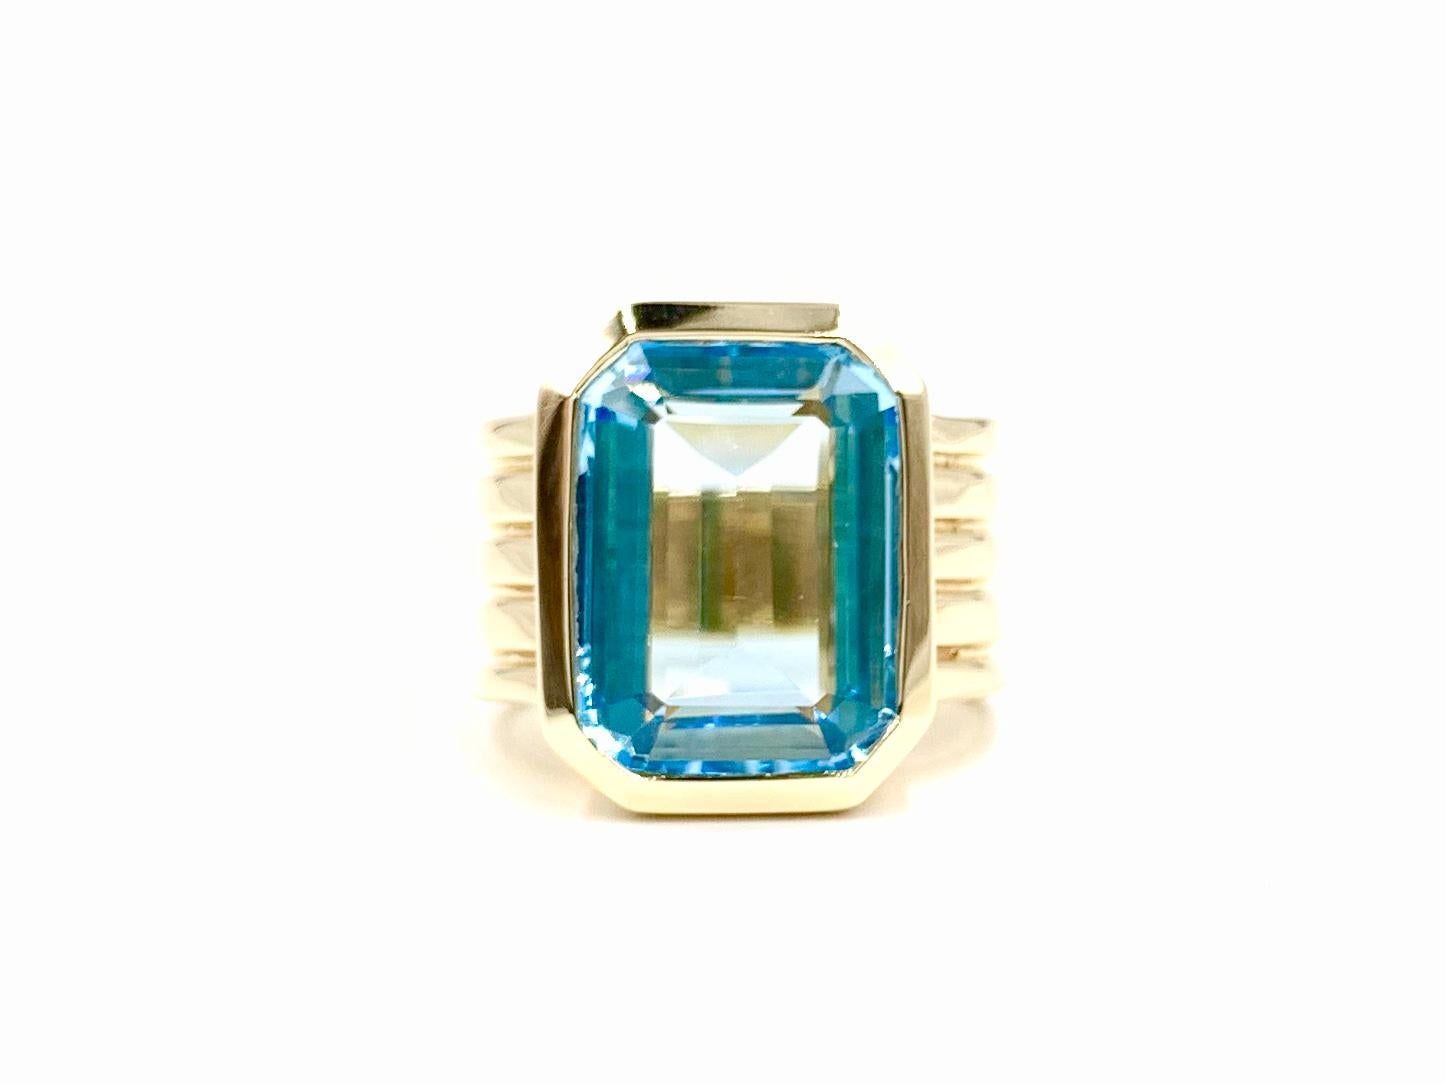 A clean and contemporary designed 14 karat gold wide ring featuring a large bezel set emerald cut vibrant blue topaz. Blue topaz measures 15mm x 11.5mm. Ring has a high-polish finish with linear grooves on the shank for added character. Width of